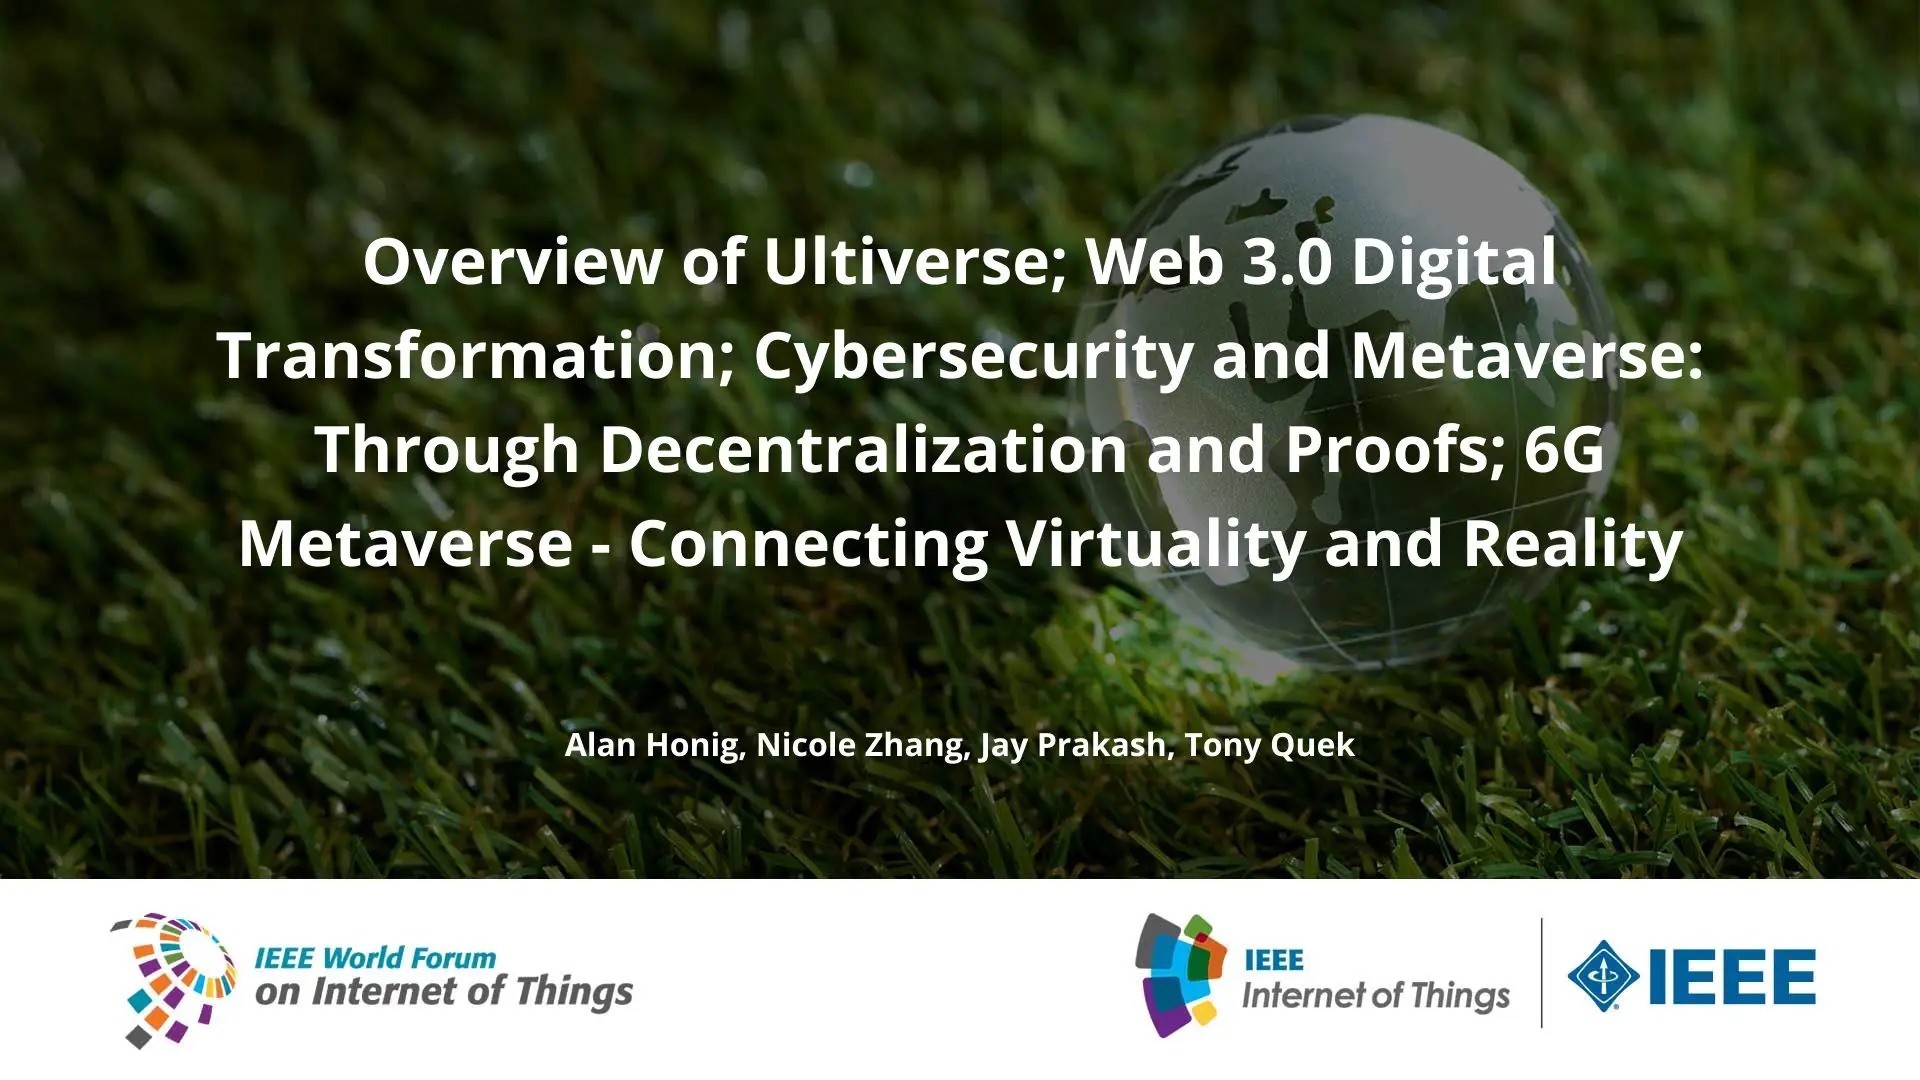 Overview of Ultiverse; Web 3.0 Digital Transformation; Cybersecurity and Metaverse: Through Decentralization and Proofs; 6G Metaverse - Connecting Virtuality and Reality